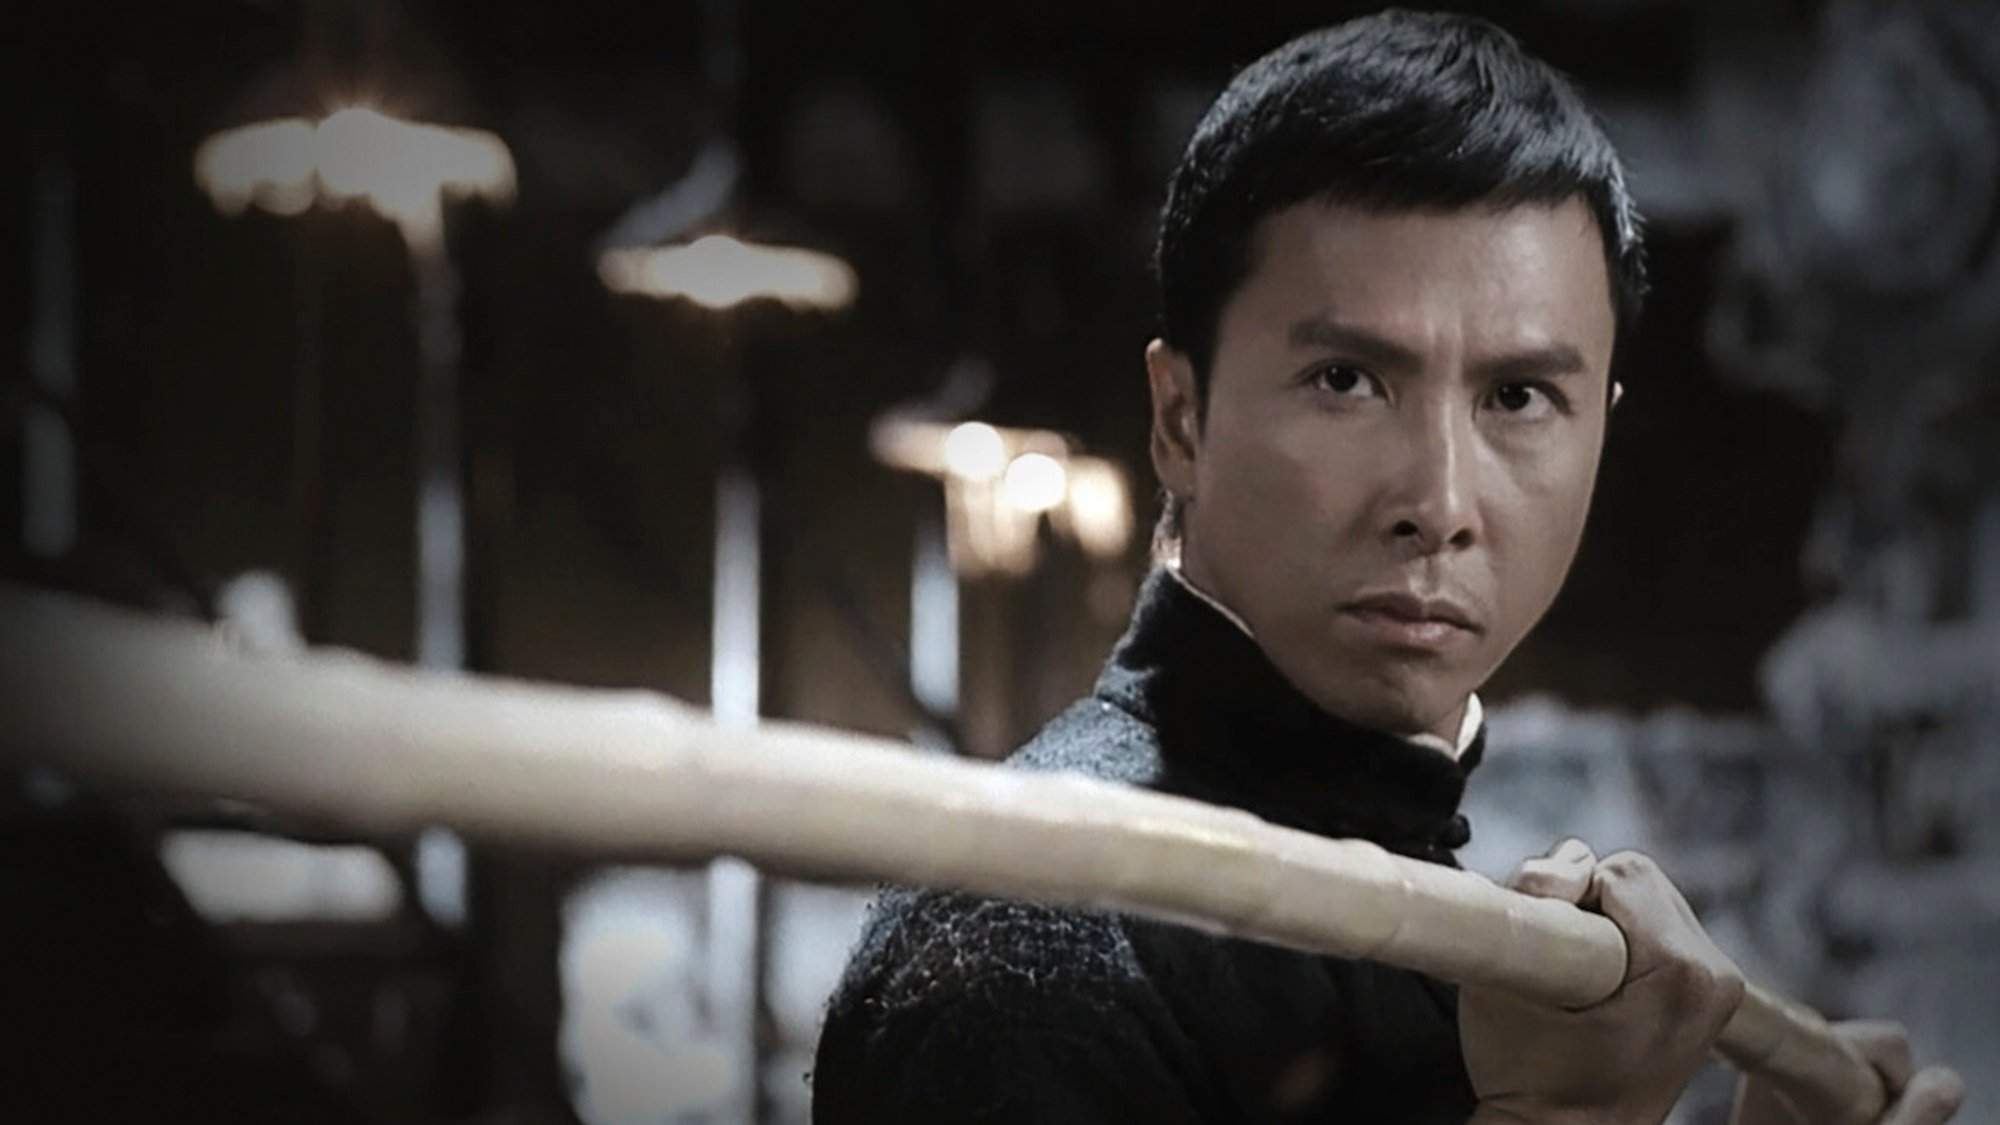 The Hong Kong star’s most famous role was in the blockbuster movie Ip Man. Photo: Mandarin Motion Pictures